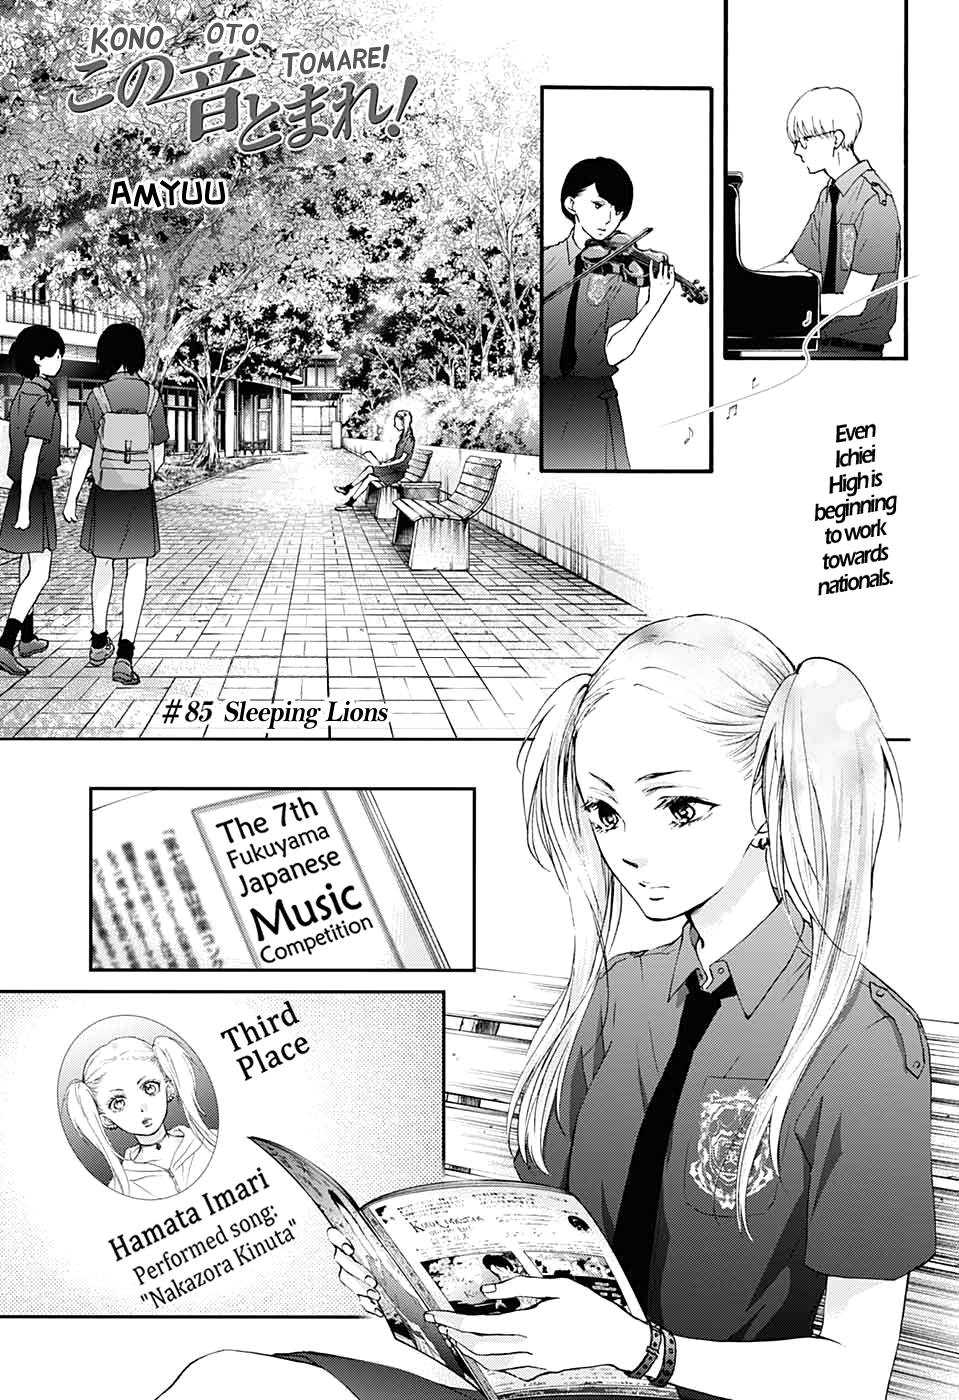 Kono Oto Tomare! Sounds Of Life Vol.22 Chapter 85: Sleeping Lions V2 - Picture 1